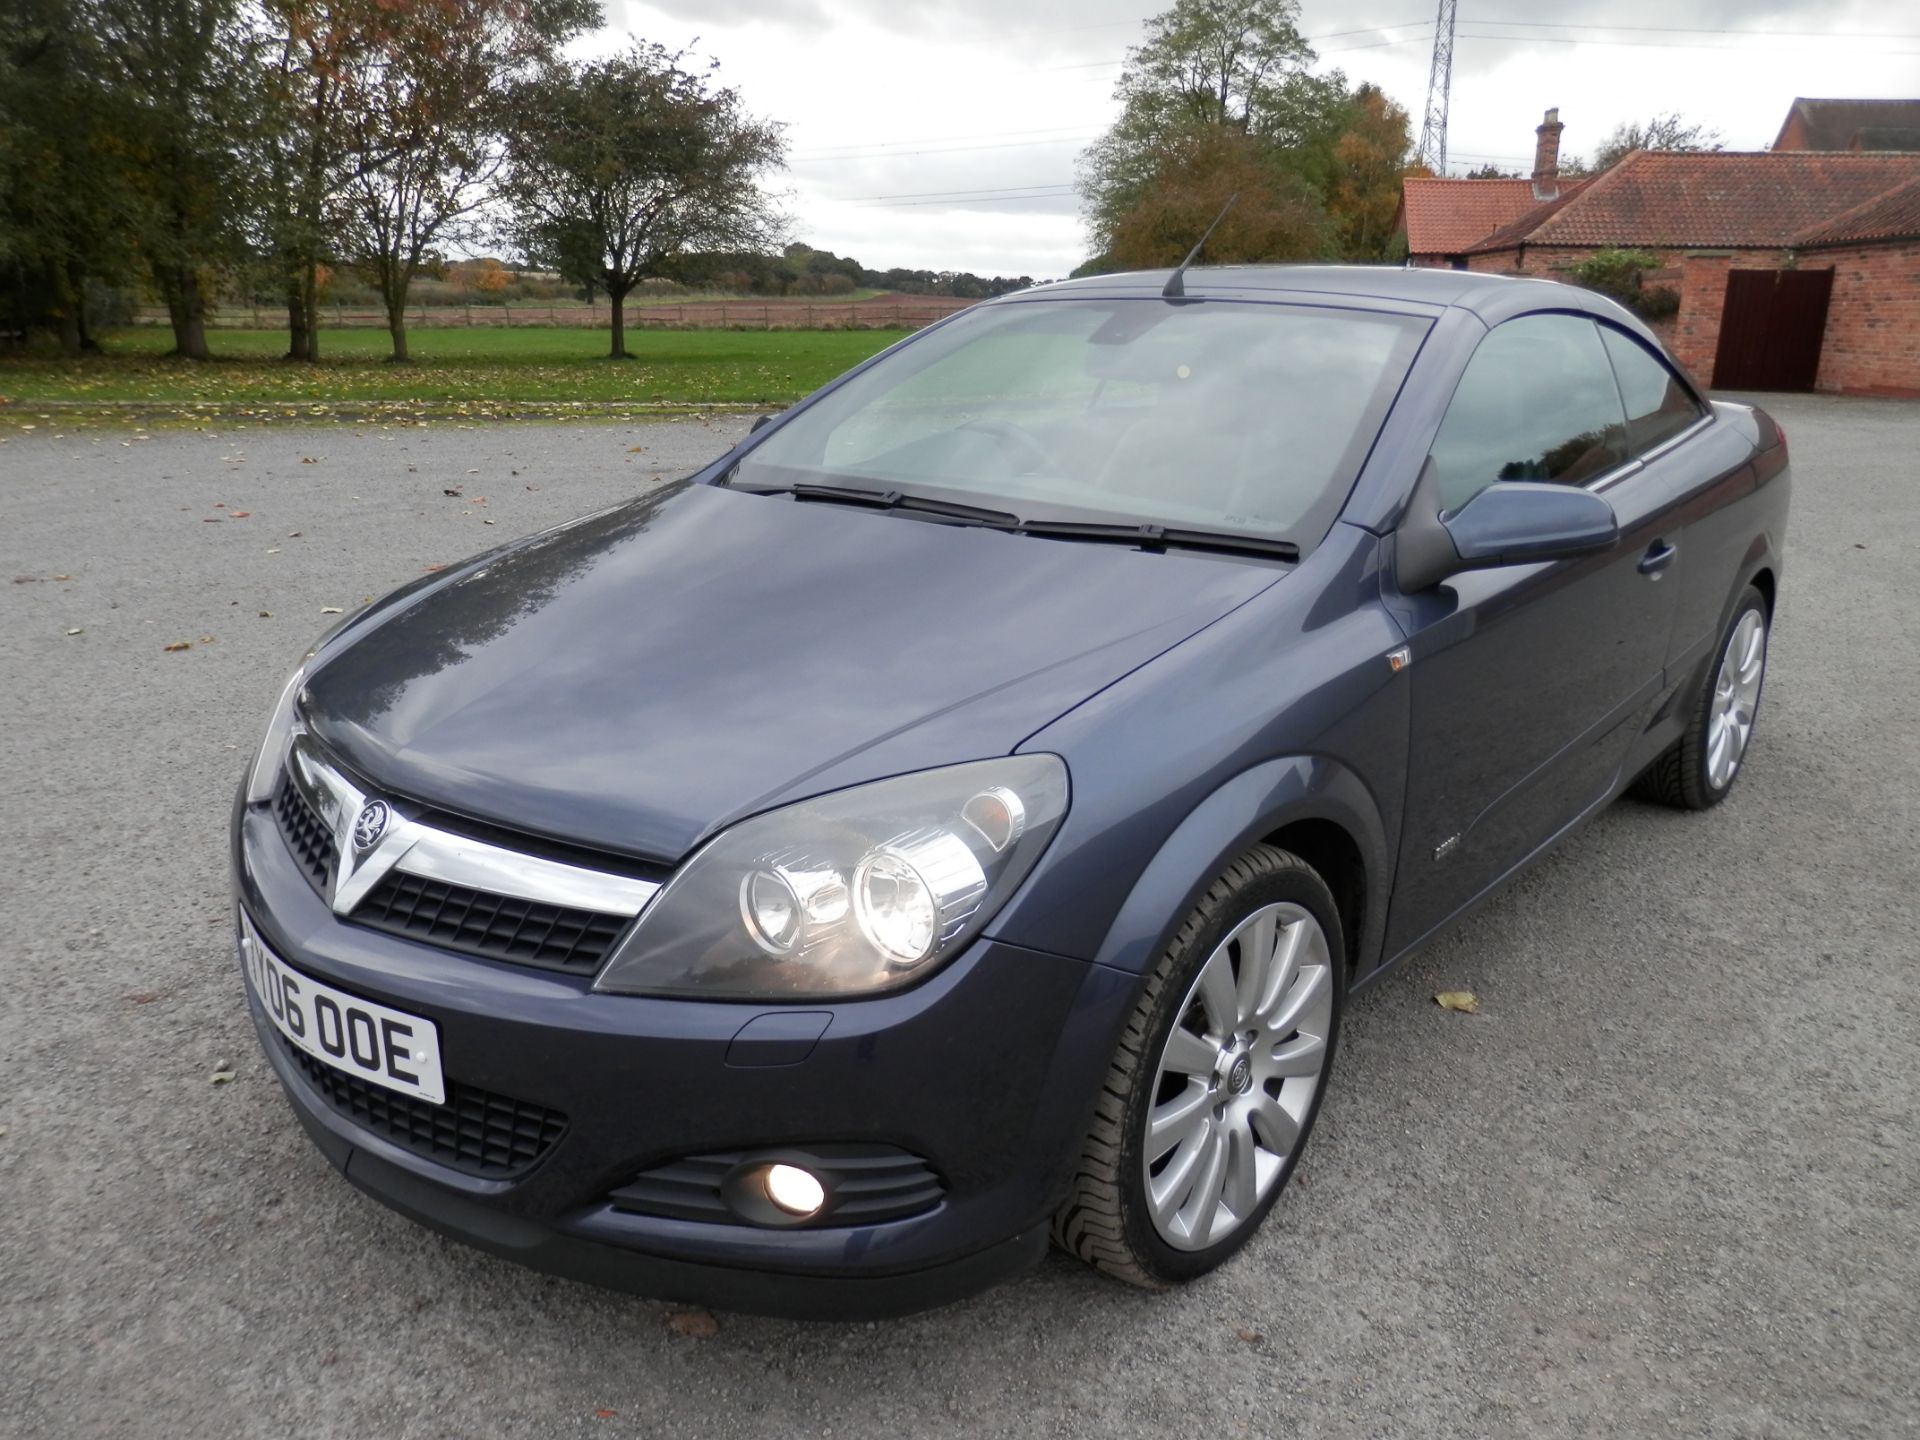 2006/06 VAUXHALL ASTRA DESIGN 1.8 SPORT TWIN TOP CONVERTIBLE, ONLY 62K MILES WARRANTED, MOT FEB 2017 - Image 8 of 24